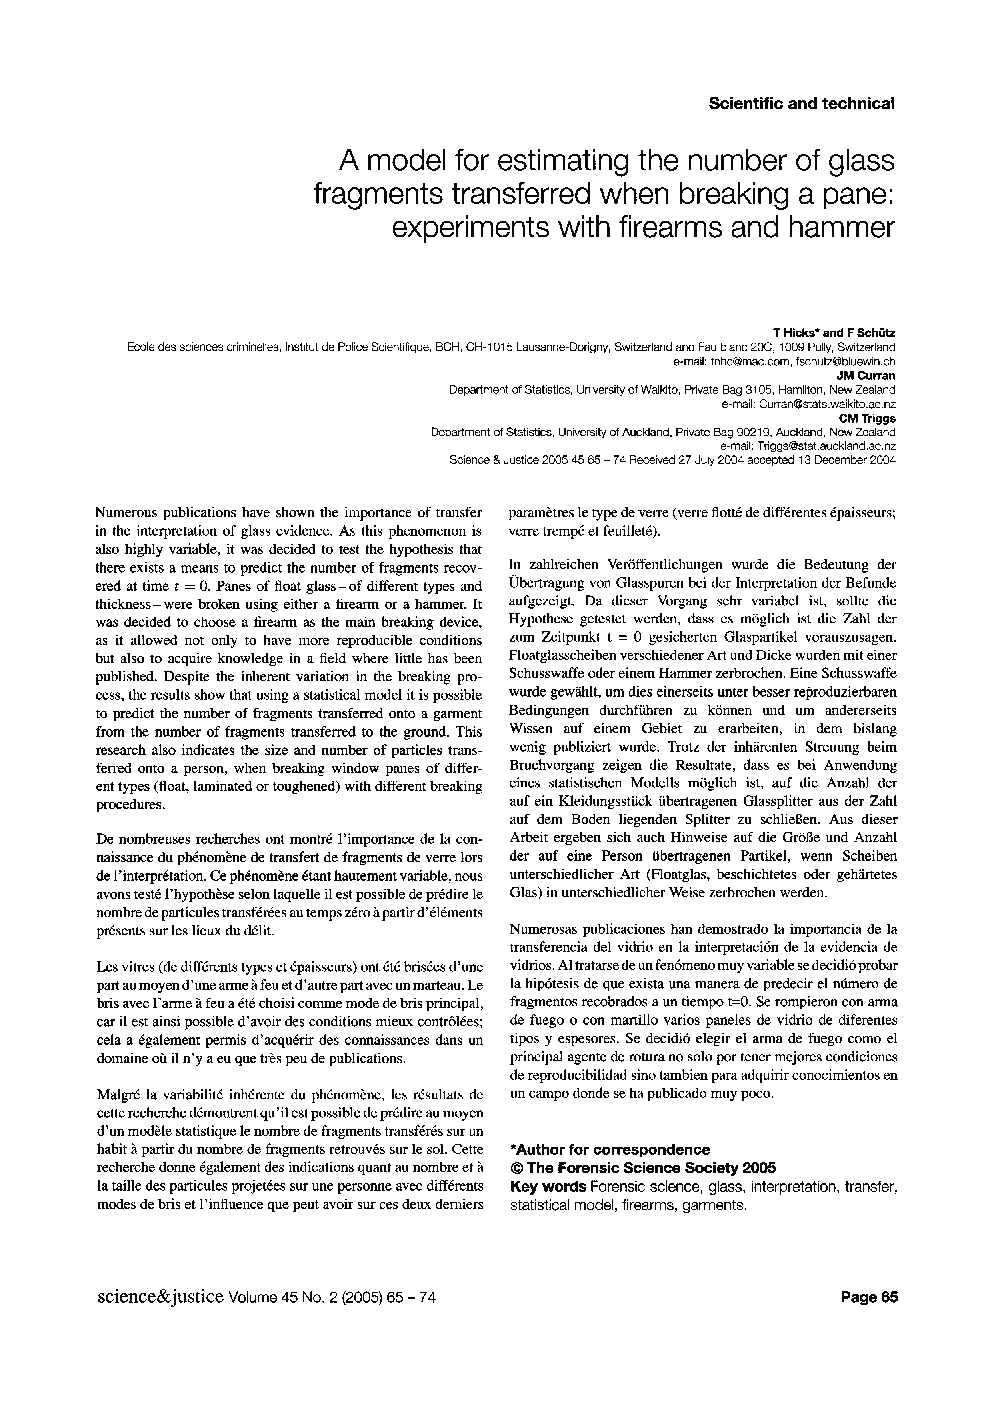 A model for estimating the number of glass fragments transferred when breaking a pane: experiments with firearms and hammer